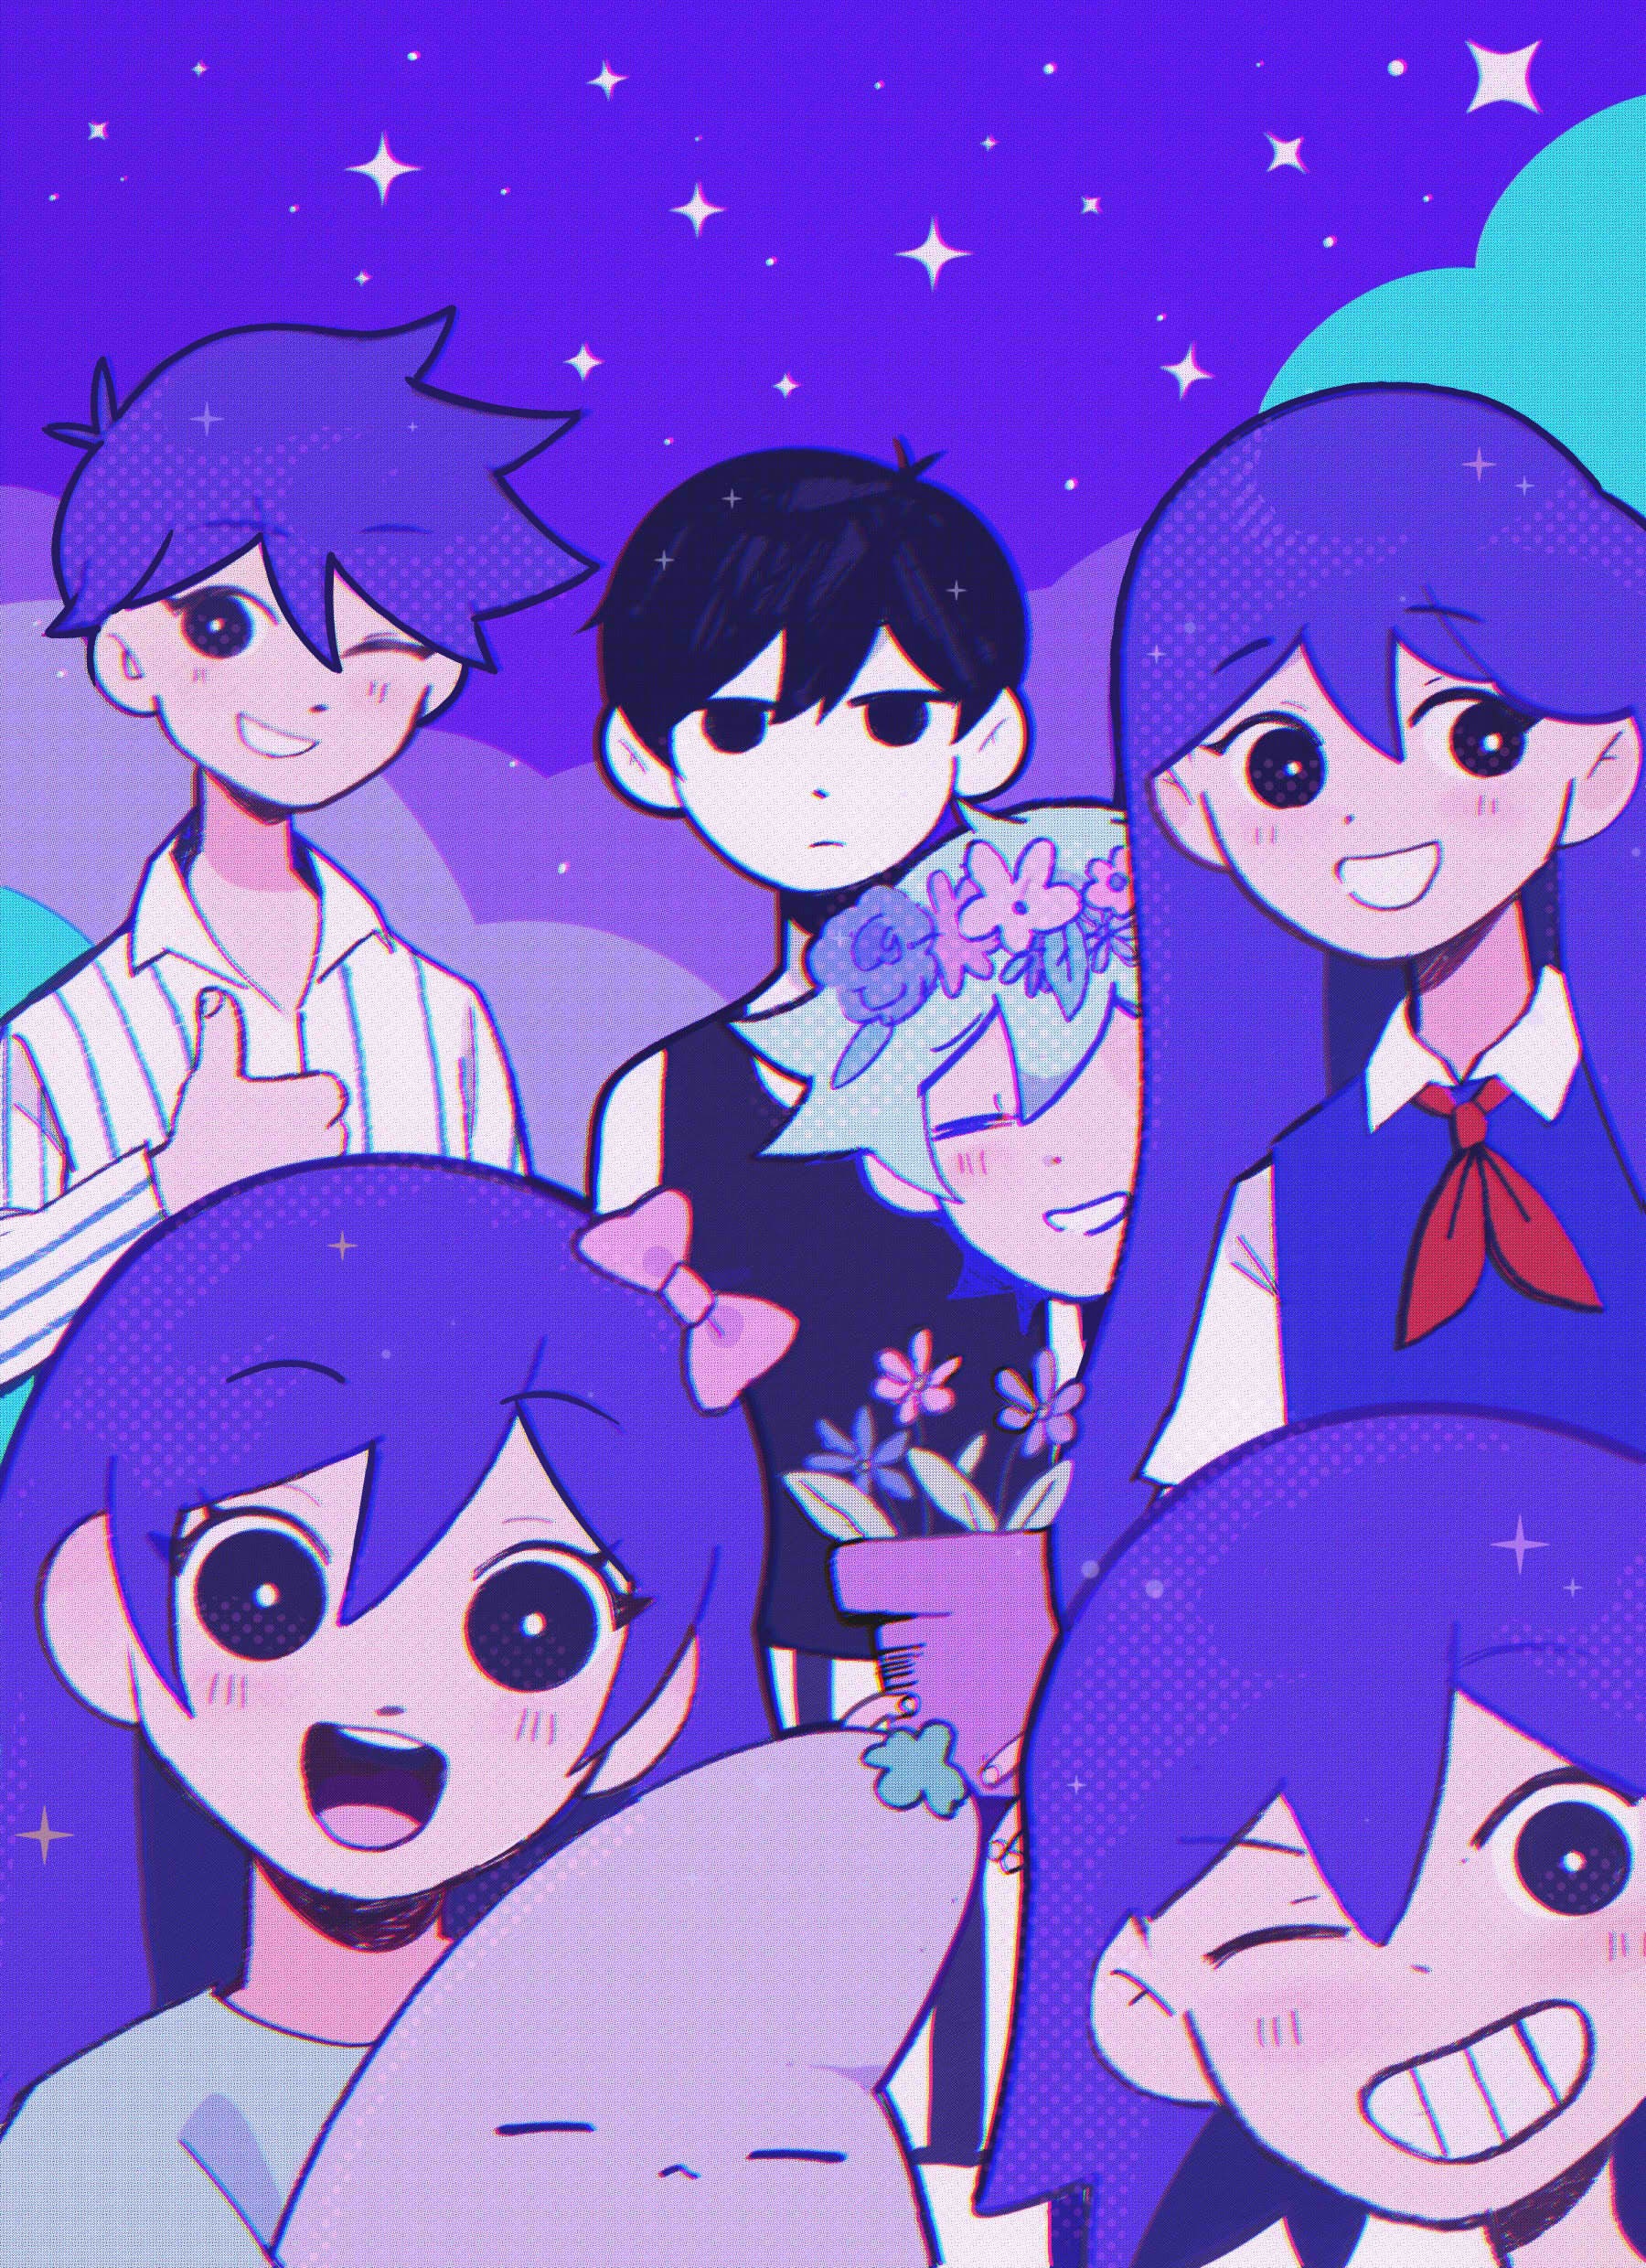 Download Omori wallpapers for mobile phone, free Omori HD pictures